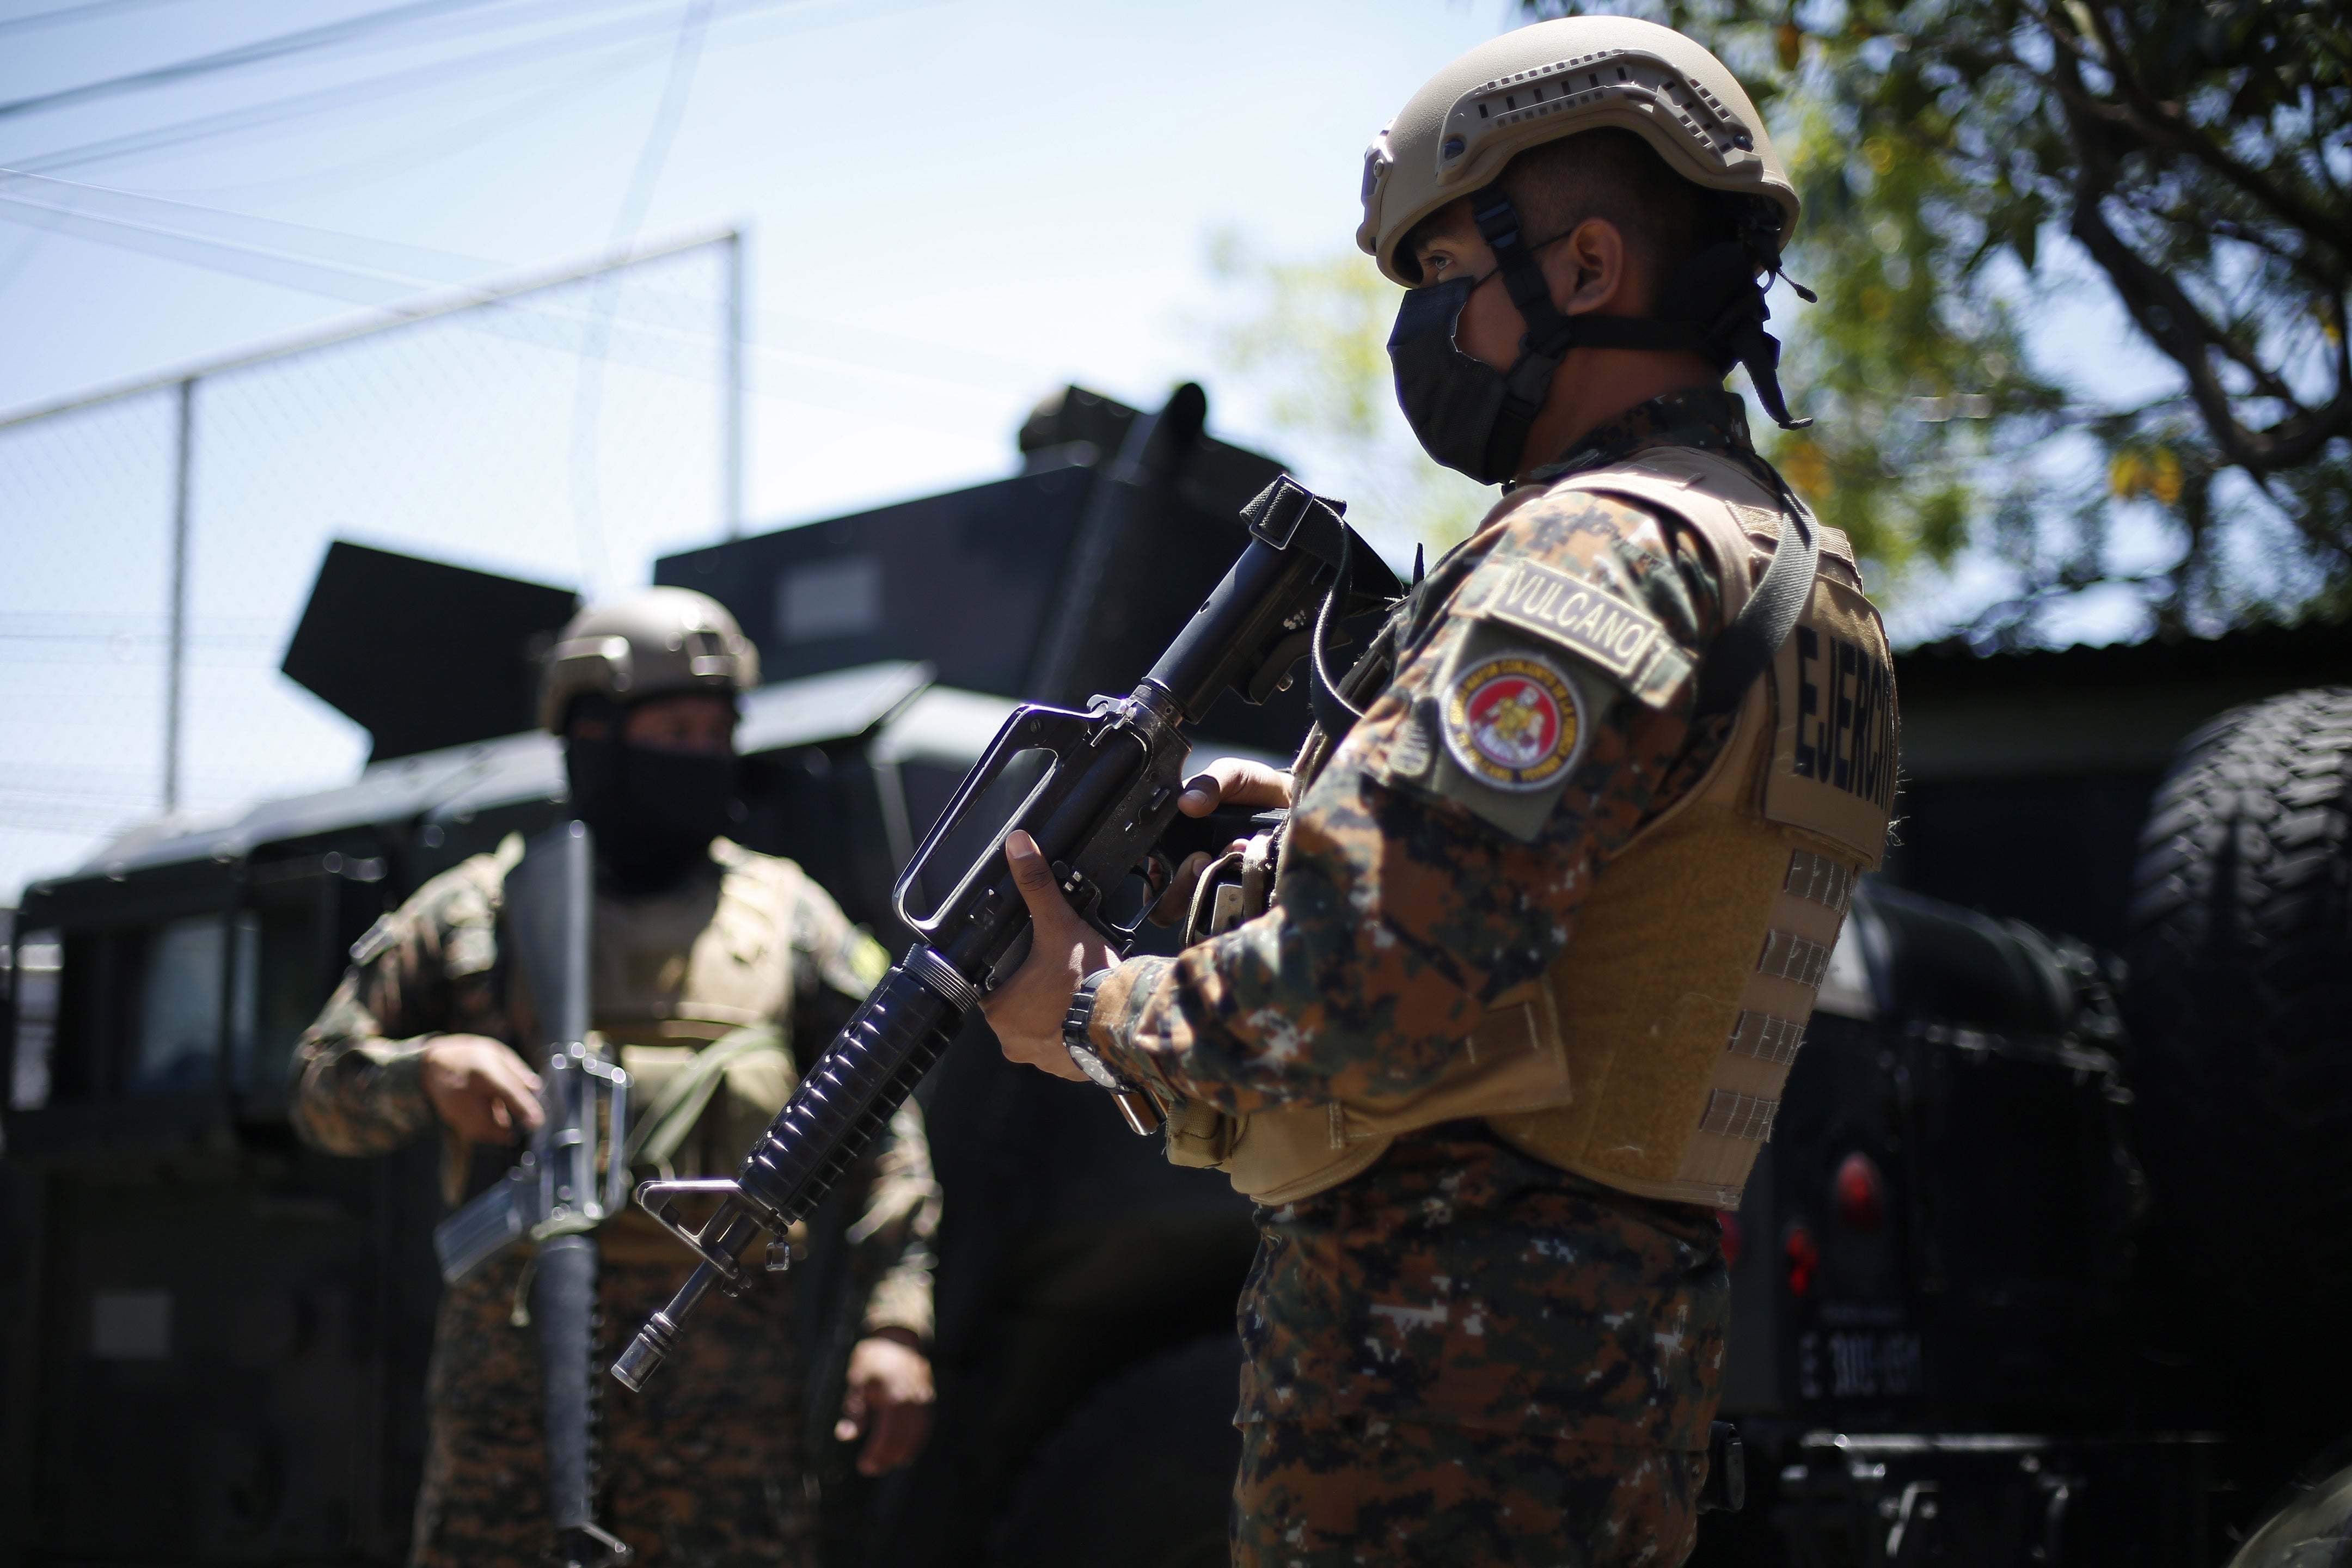 Army members carry on searches at a check point in Santa Tecla, El Salvador